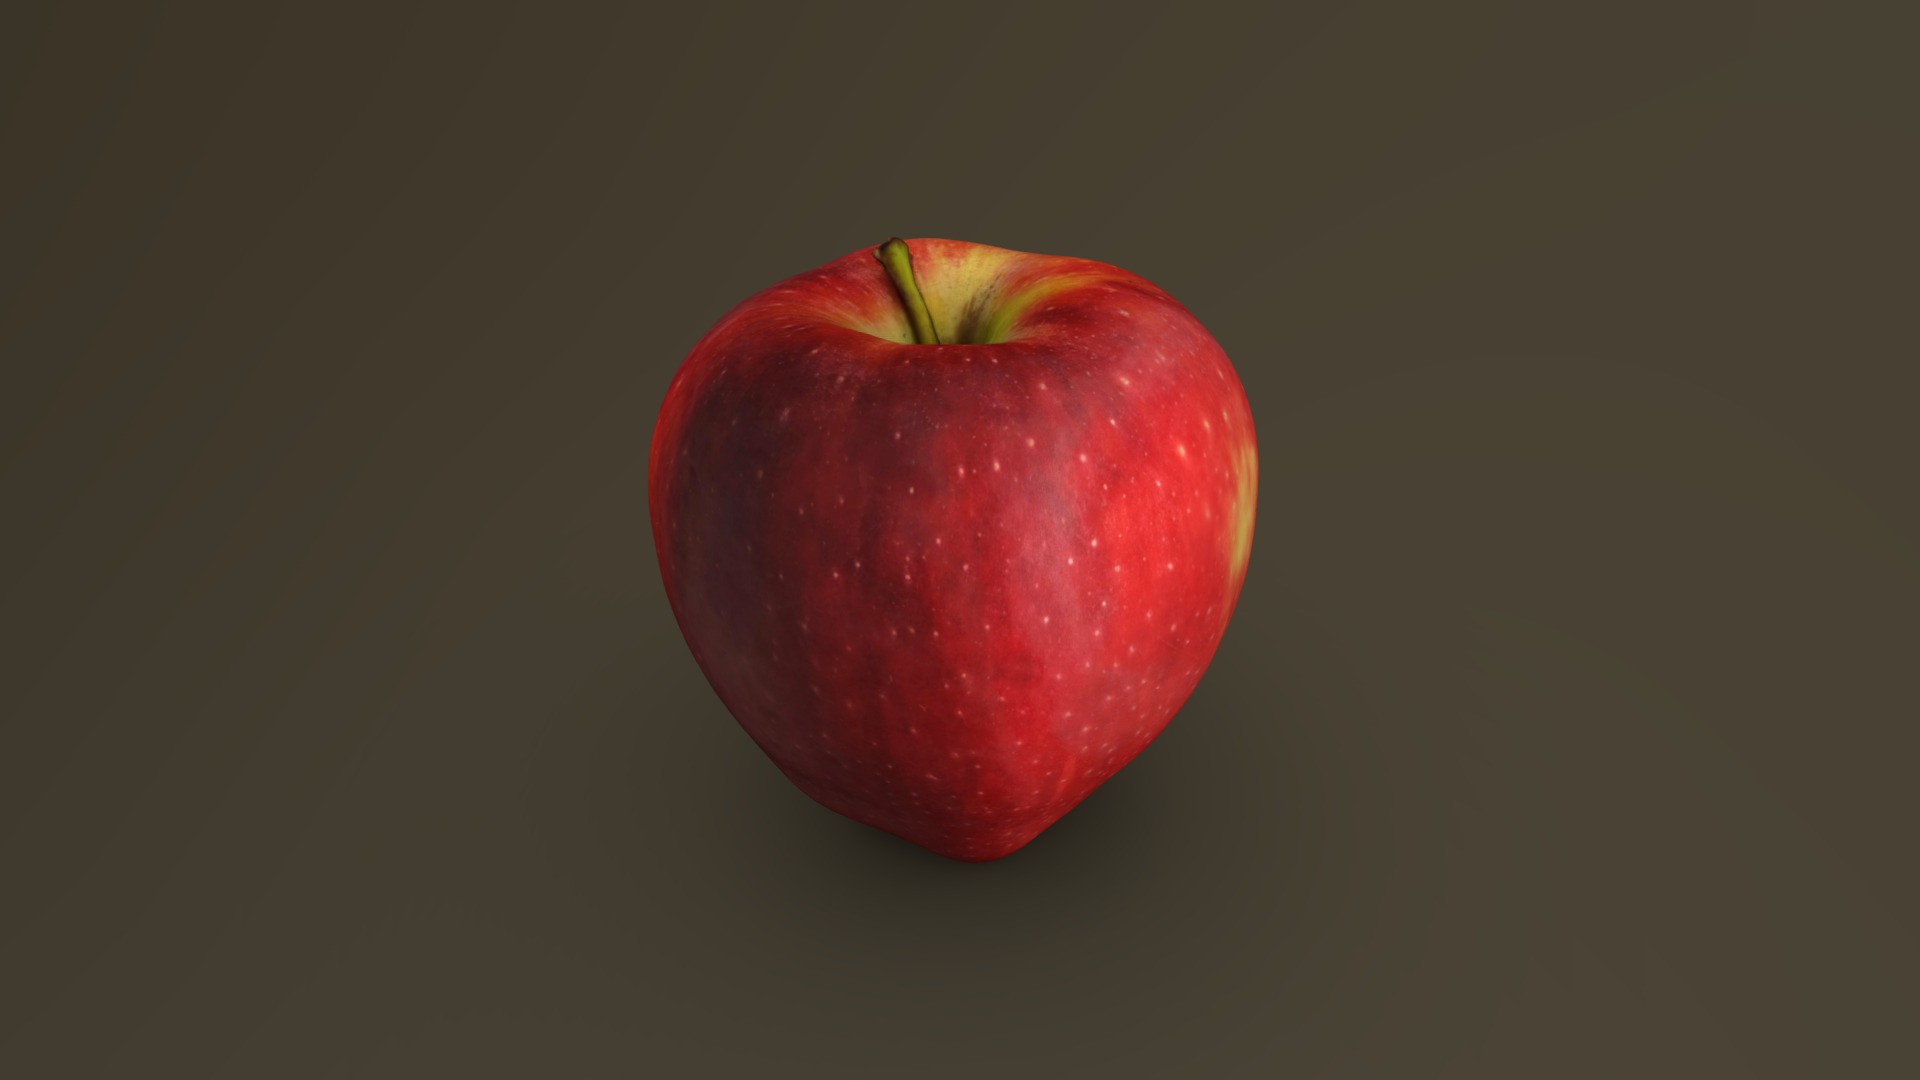 3D model Red Delicious Apple 01 - This is a 3D model of the Red Delicious Apple 01. The 3D model is about a red apple with a stem.